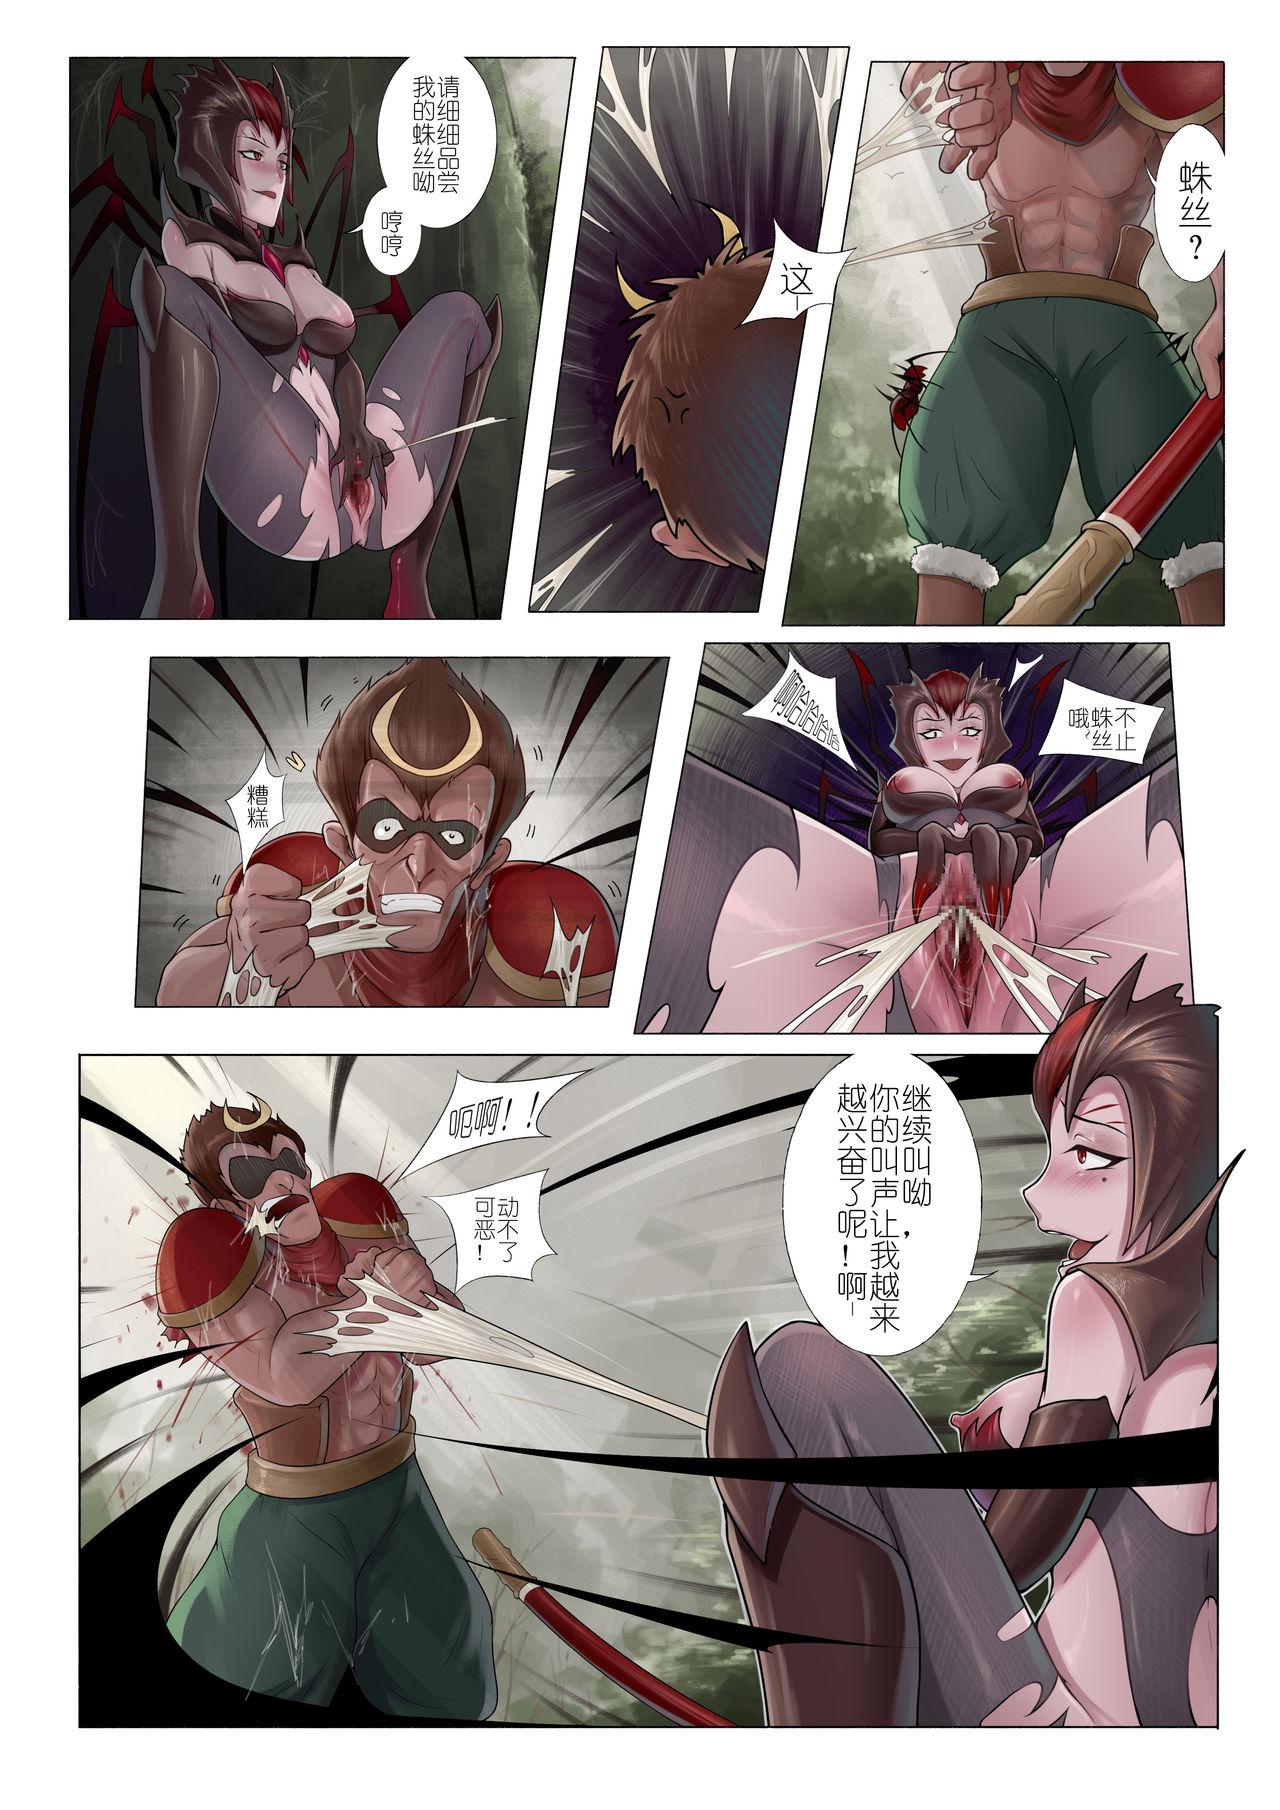 Pussy 恶女退治2蜘蛛女皇 - League of legends Family Roleplay - Page 5